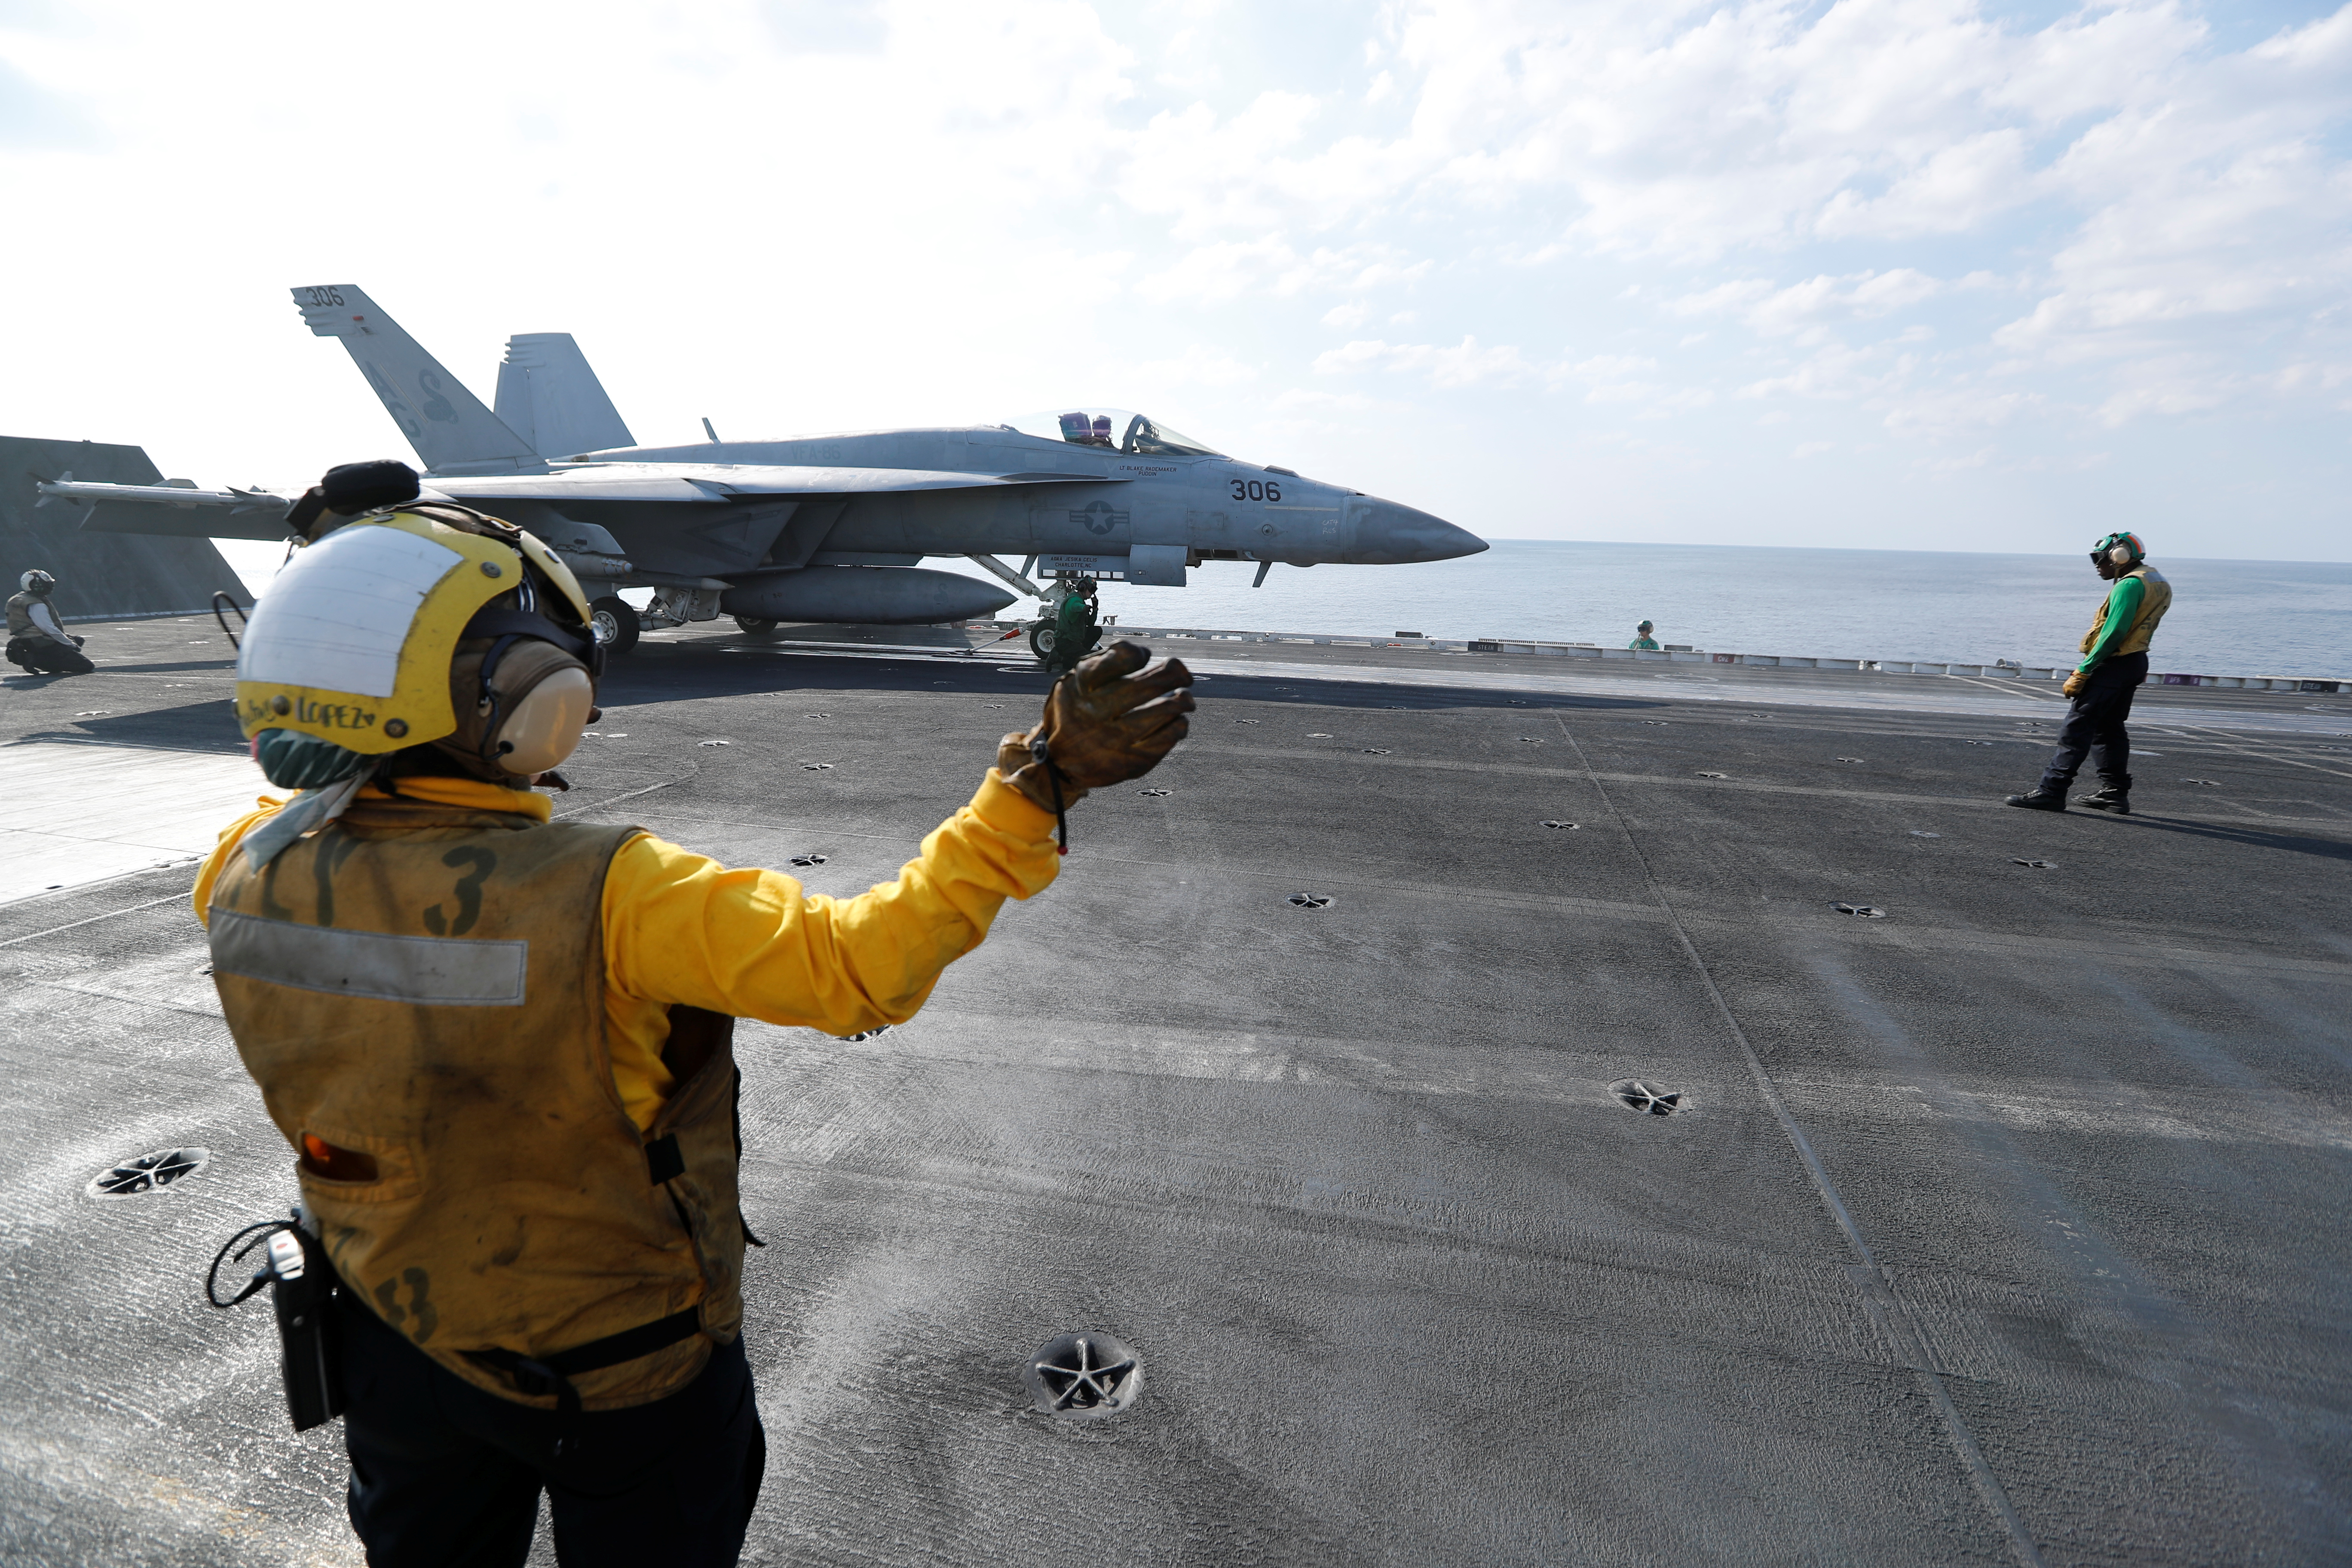 Shooter and Controler prepare an F/A-18E Super Hornet to be catapulted off from the flight deck of the aircraft carrier USS Abraham Lincoln in the Gulf